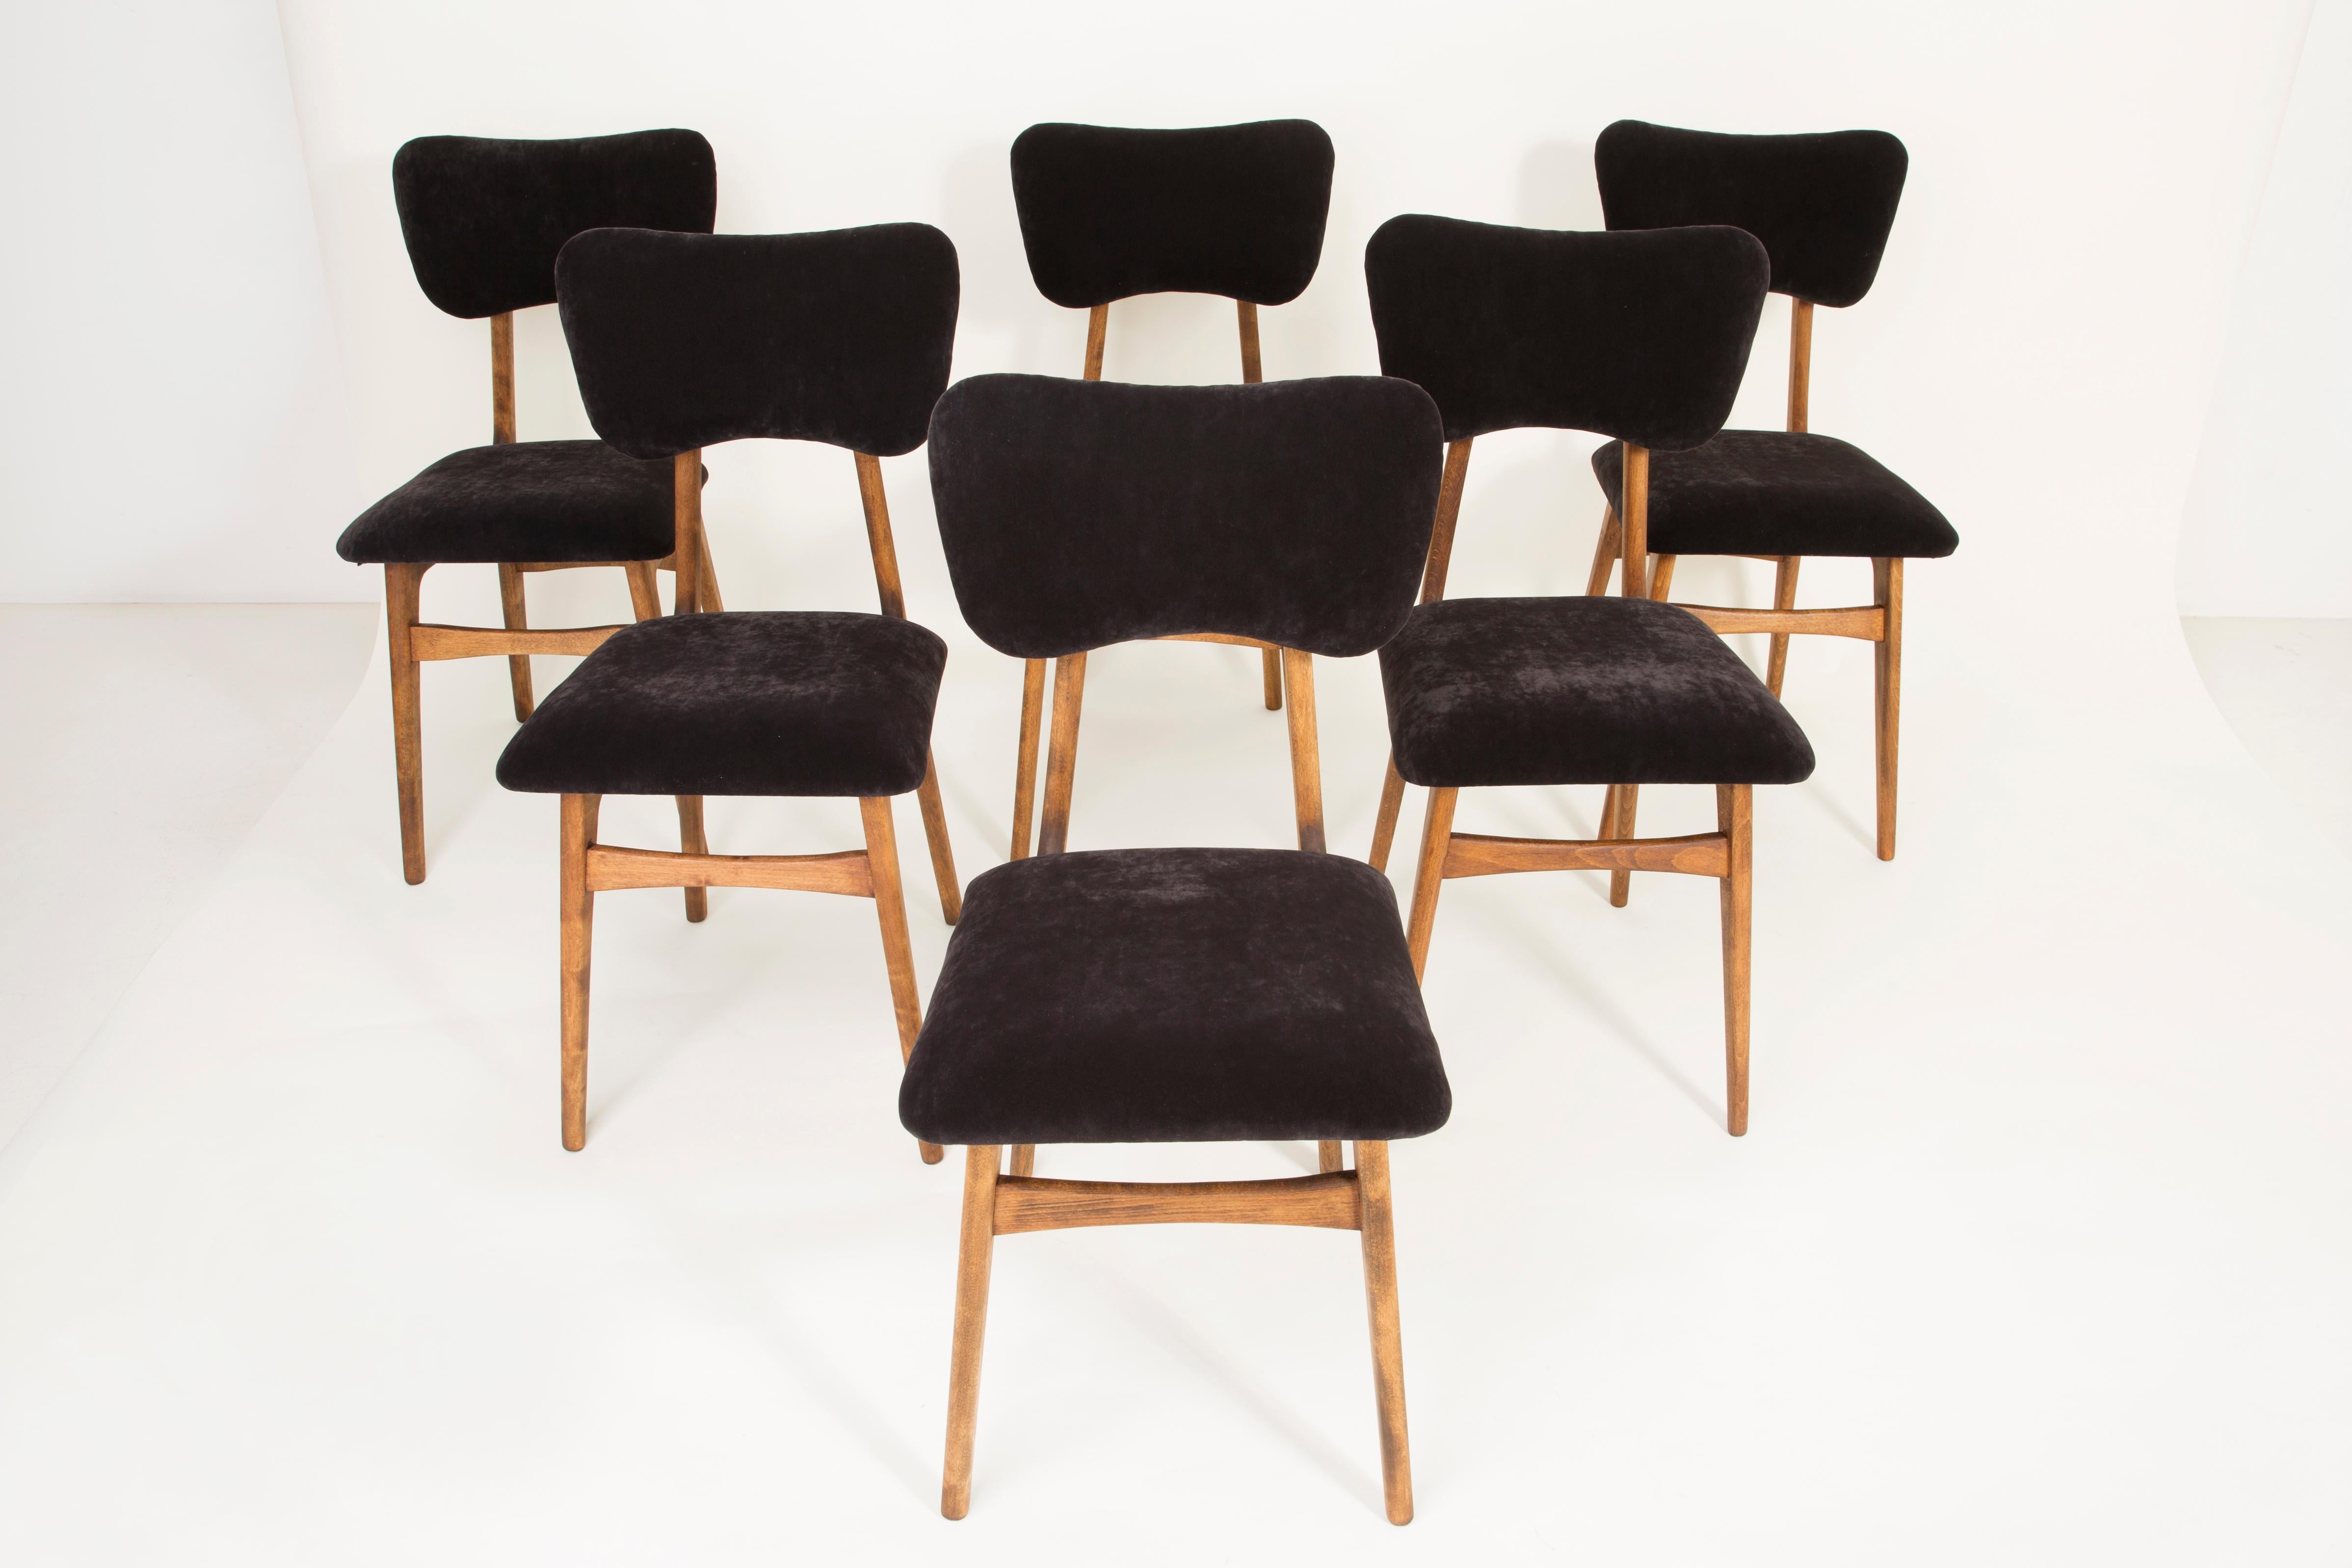 Chairs designed by prof. Rajmund Halas. Made of beechwood. Chair is after a complete upholstery renovation, the woodwork has been refreshed. Seat and back is dressed in black, durable and pleasant to the touch velvet fabric. Chair is stable and very